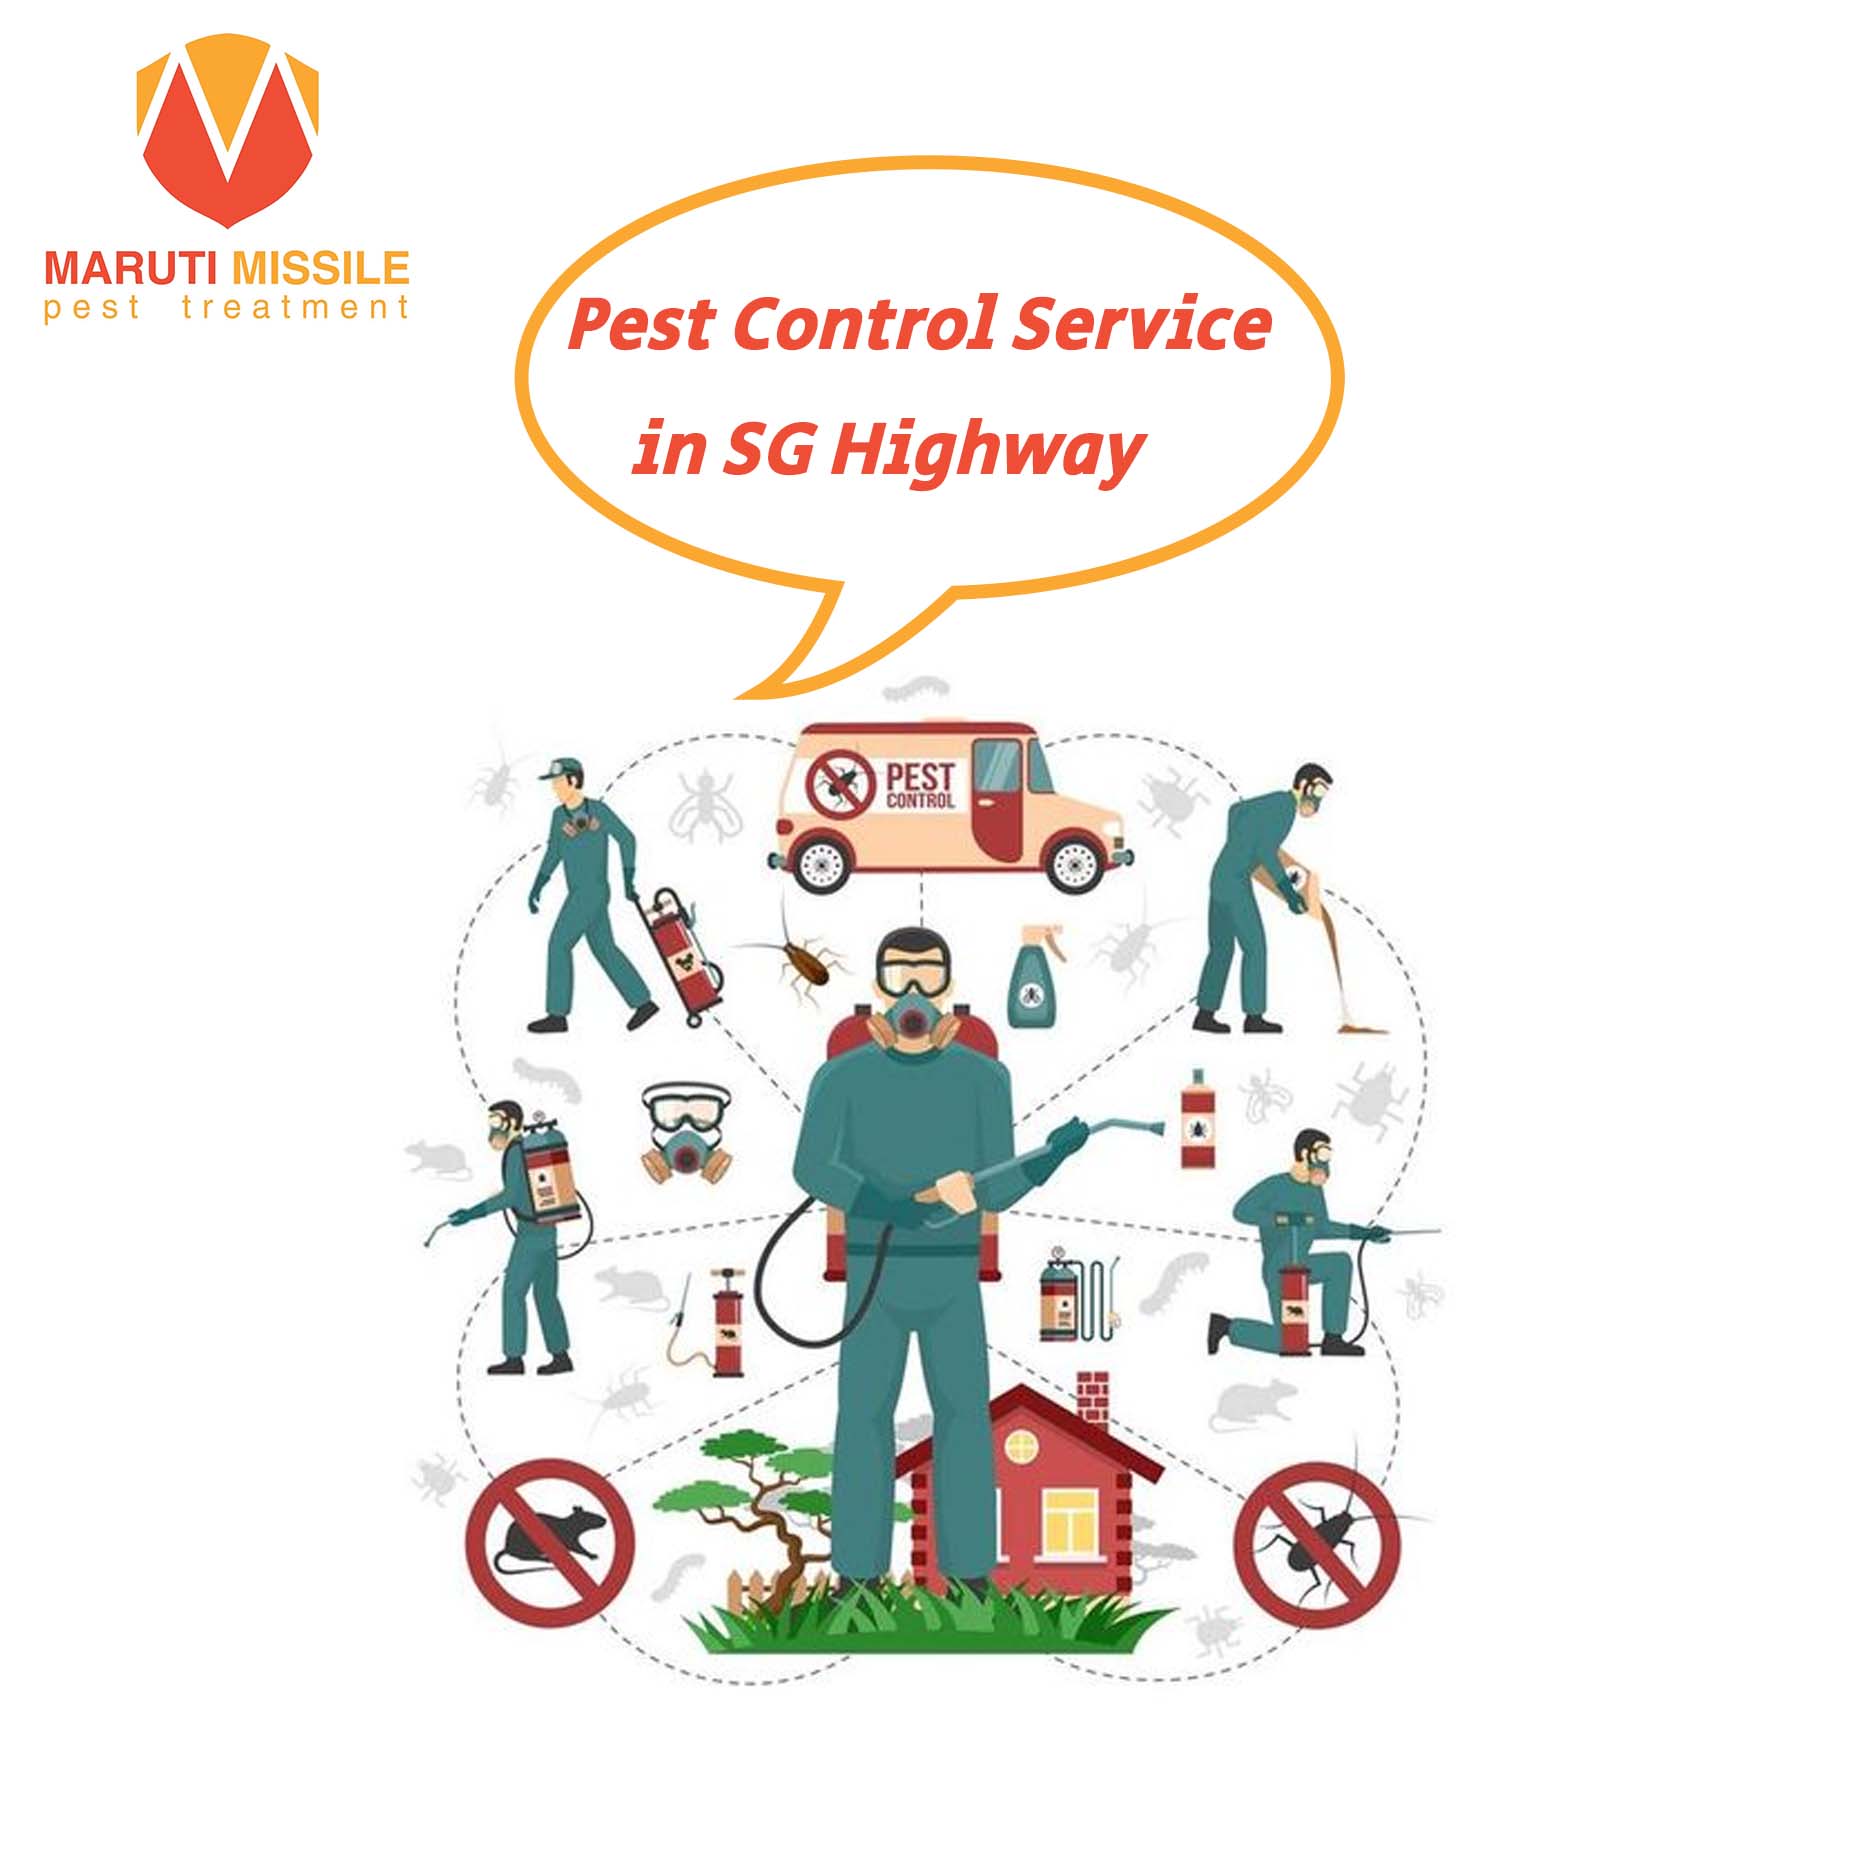 Pest Control Service in SG Highway